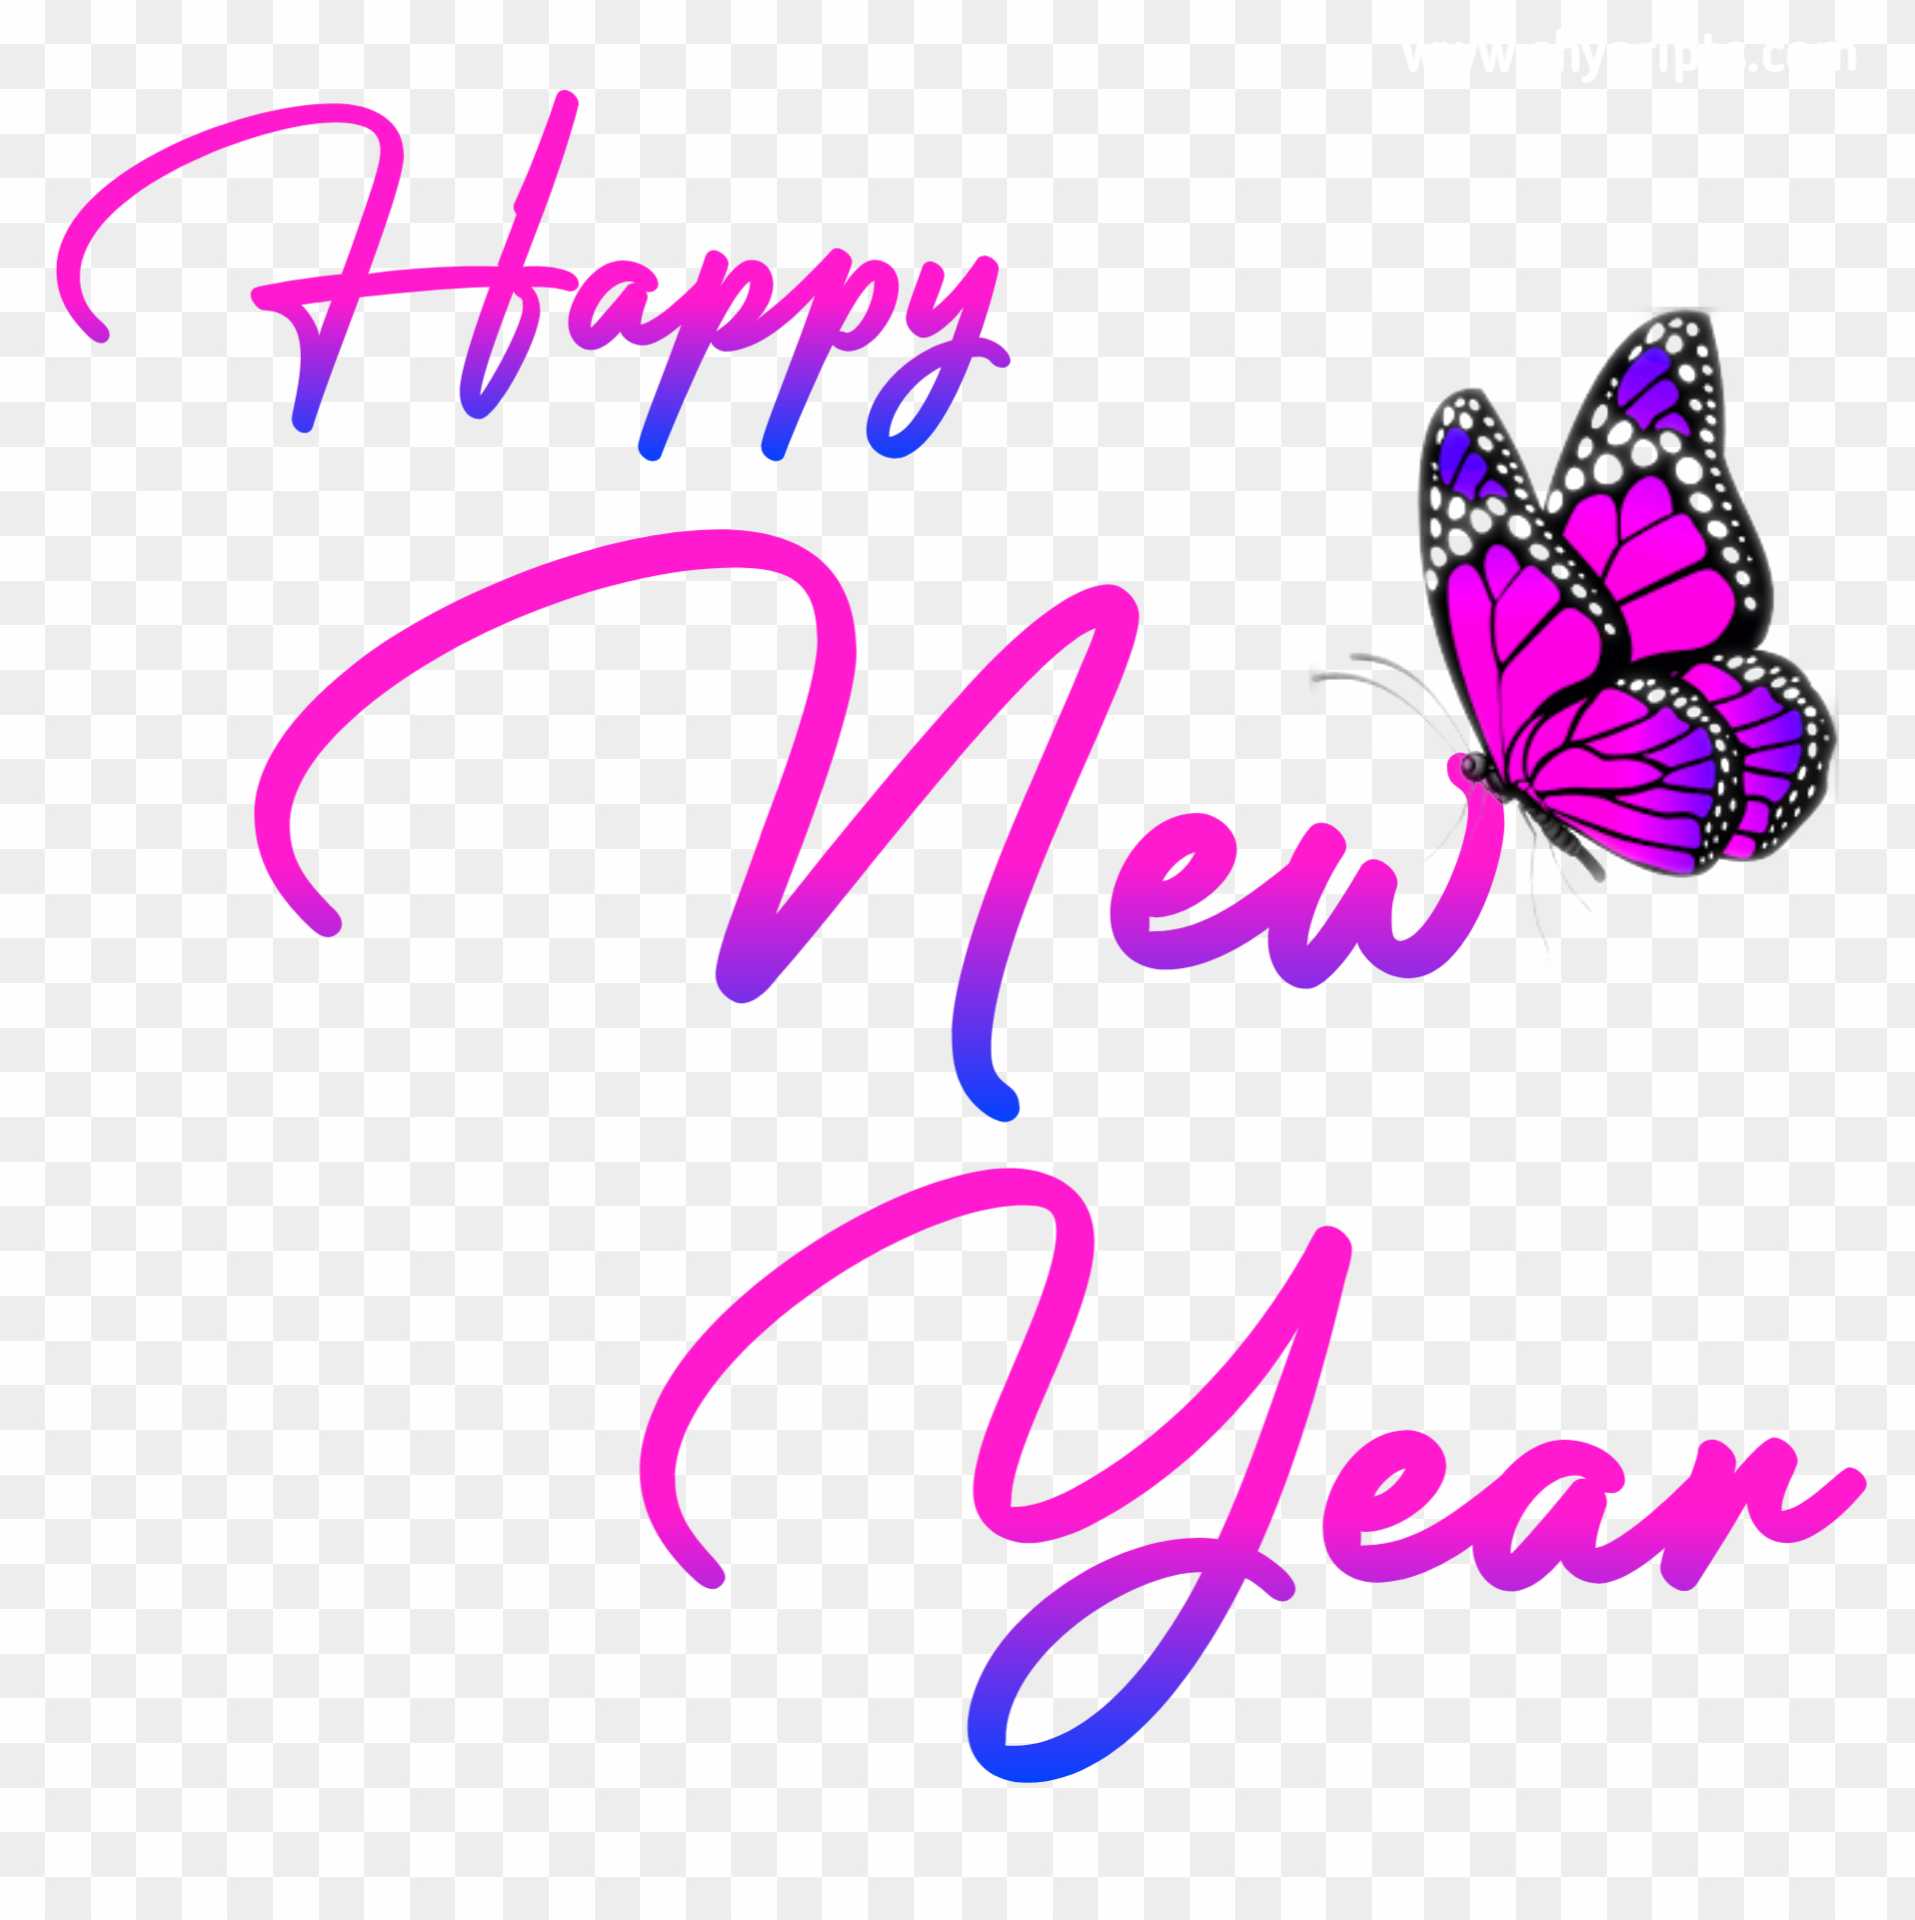 Happy New year beautiful PNG images